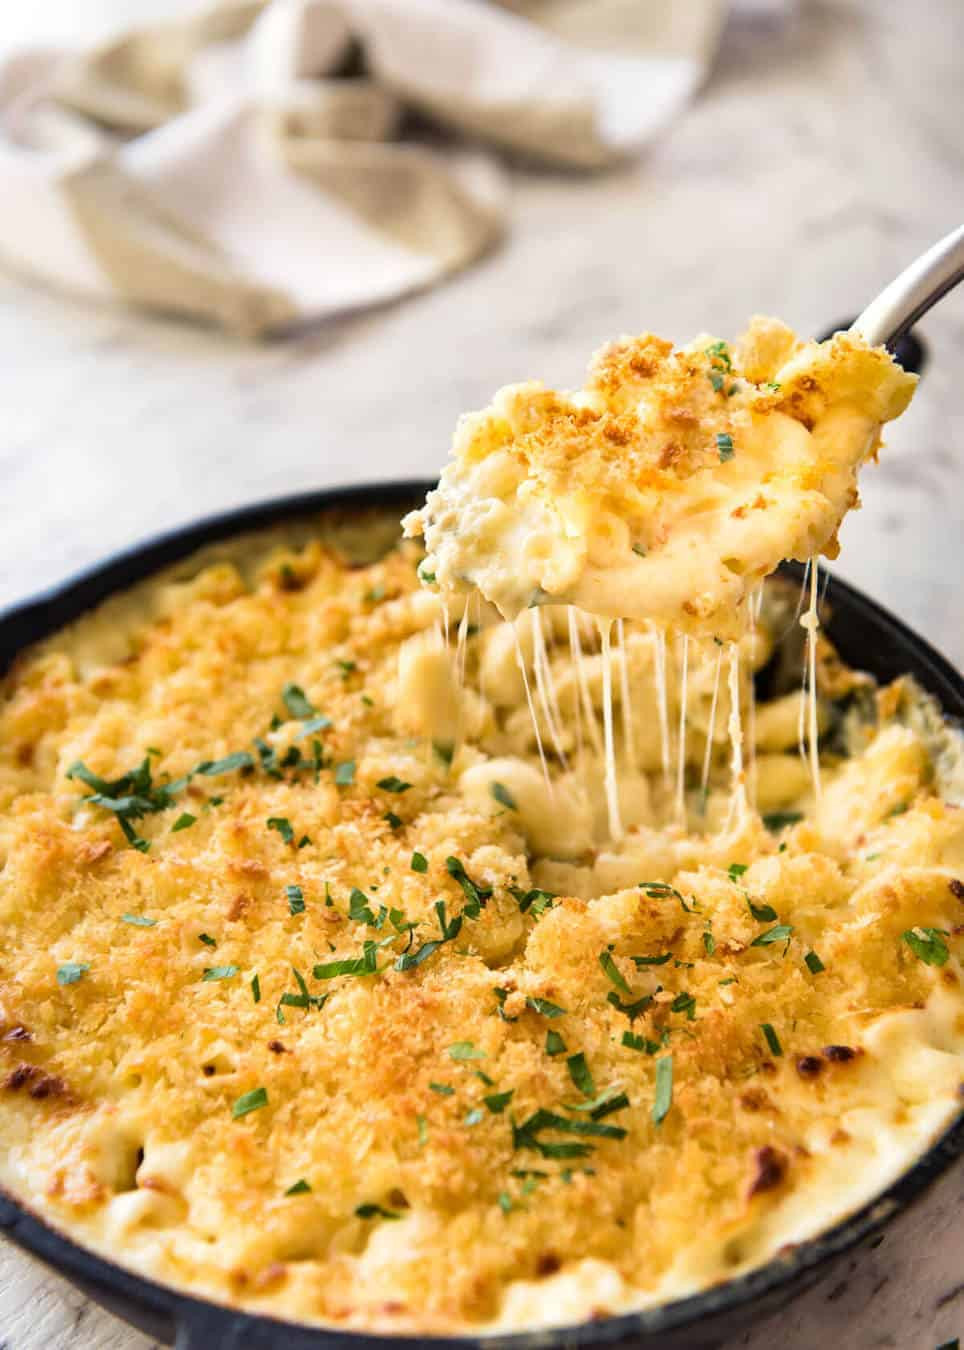 Baked Macaroni And Cheese Ingredients
 What Thanksgiving Side Dish You Are Based on Your Zodiac